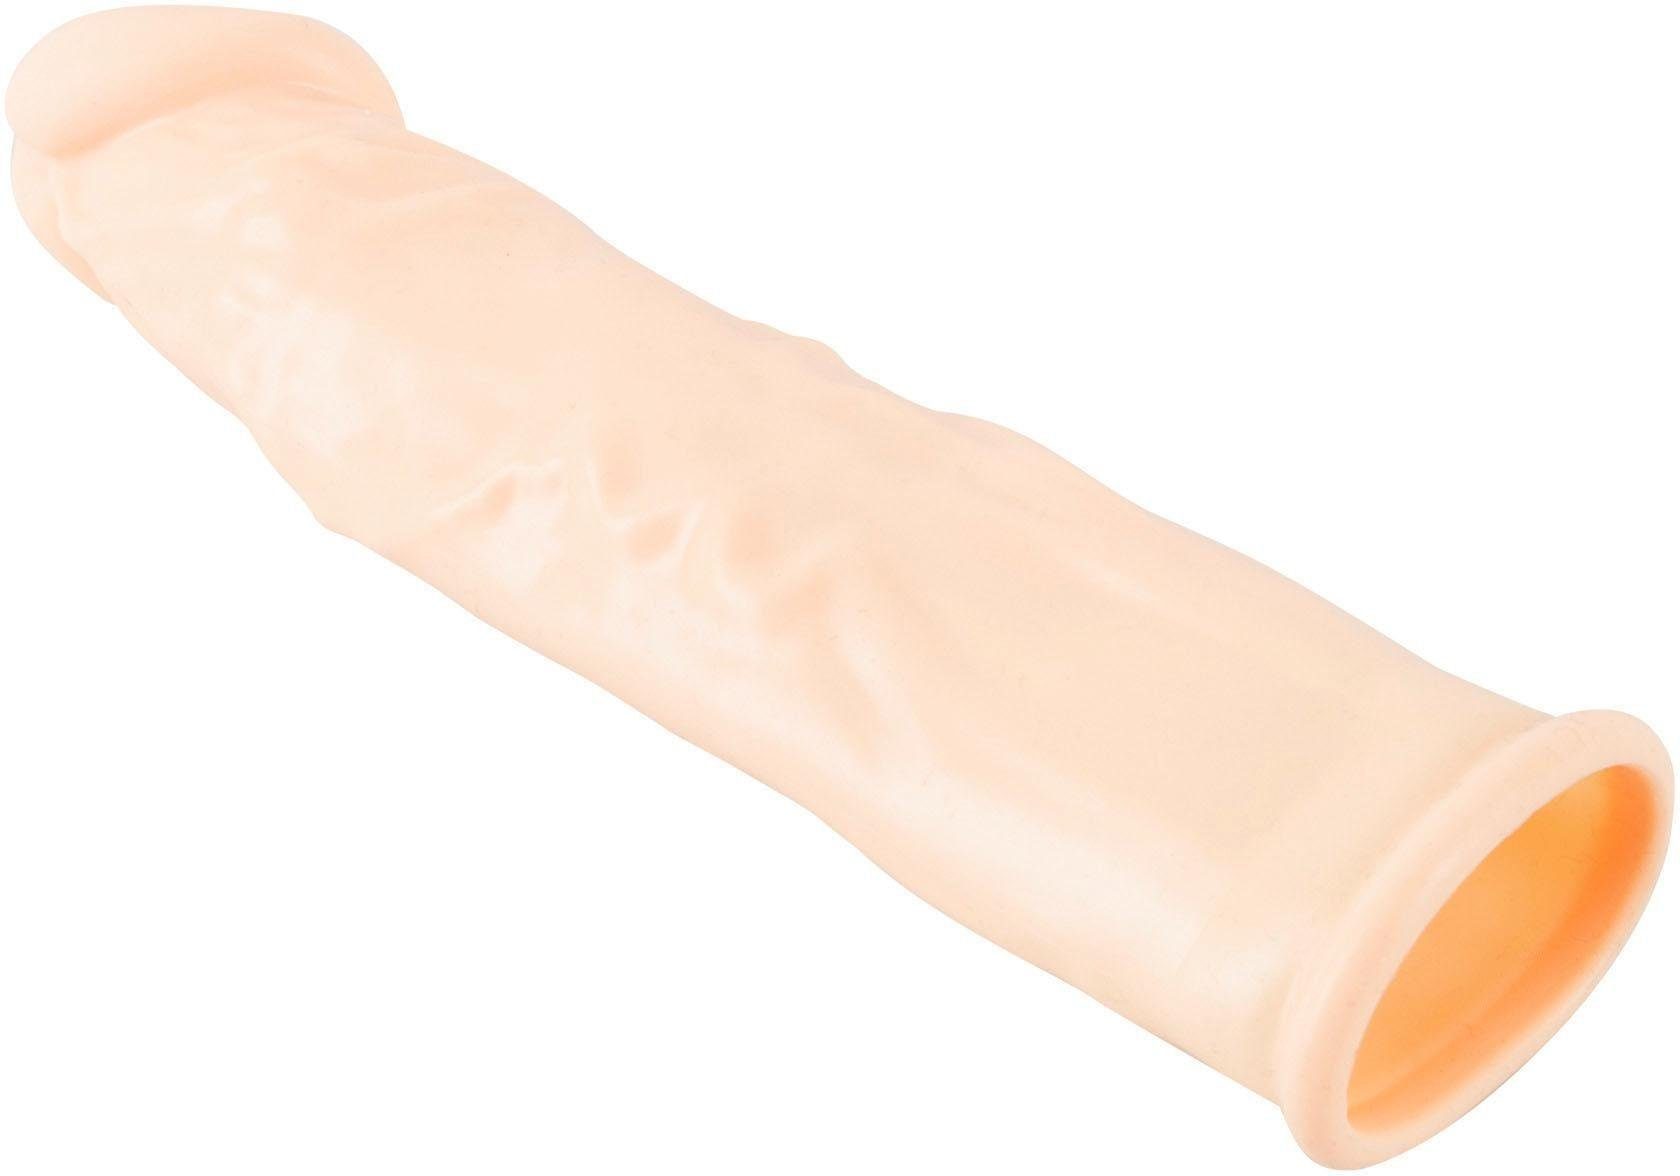 Silicone Extension Penishülle You2Toys